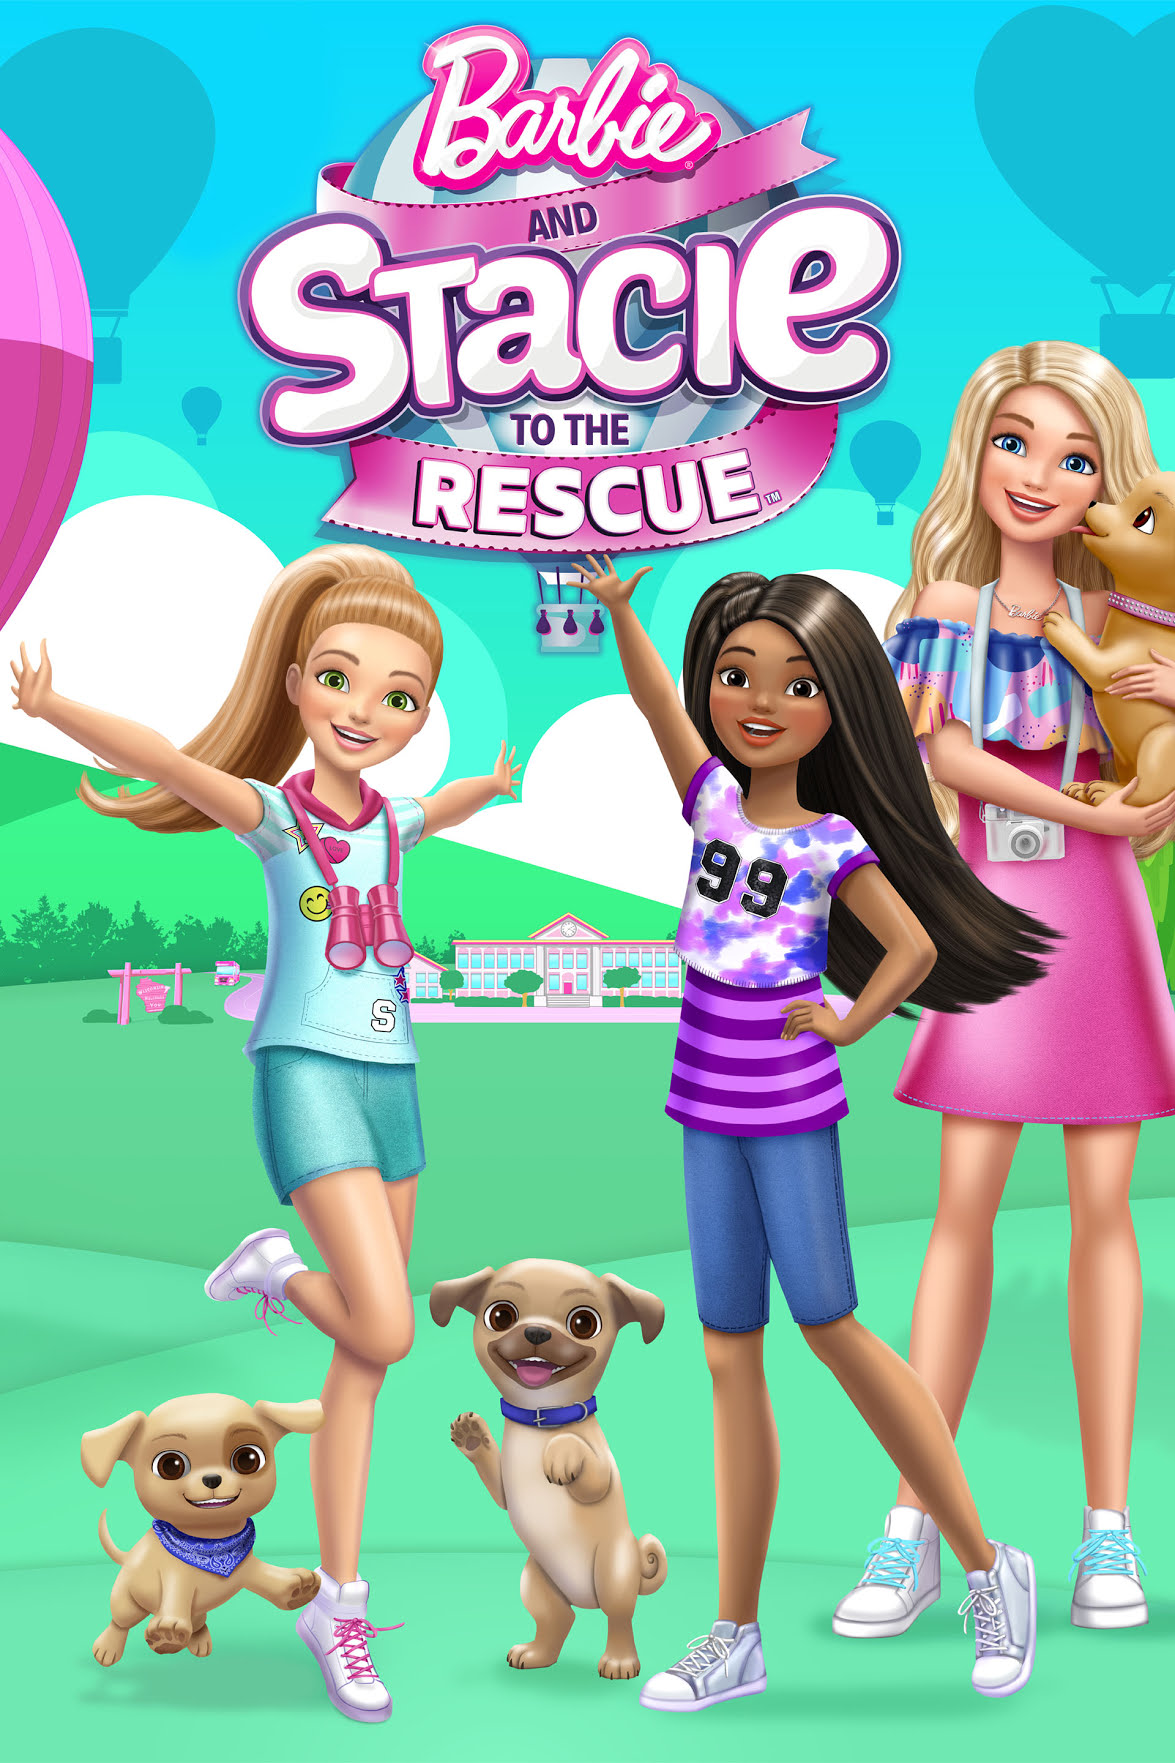 When the Roberts family heads to Wisconsin for a hot air balloon festival, Stacie finds herself caught in between – too young for the adult activities and too old to play with the littles. But when Barbie and Skipper have a mishap, Stacie has the right skills to save the day!